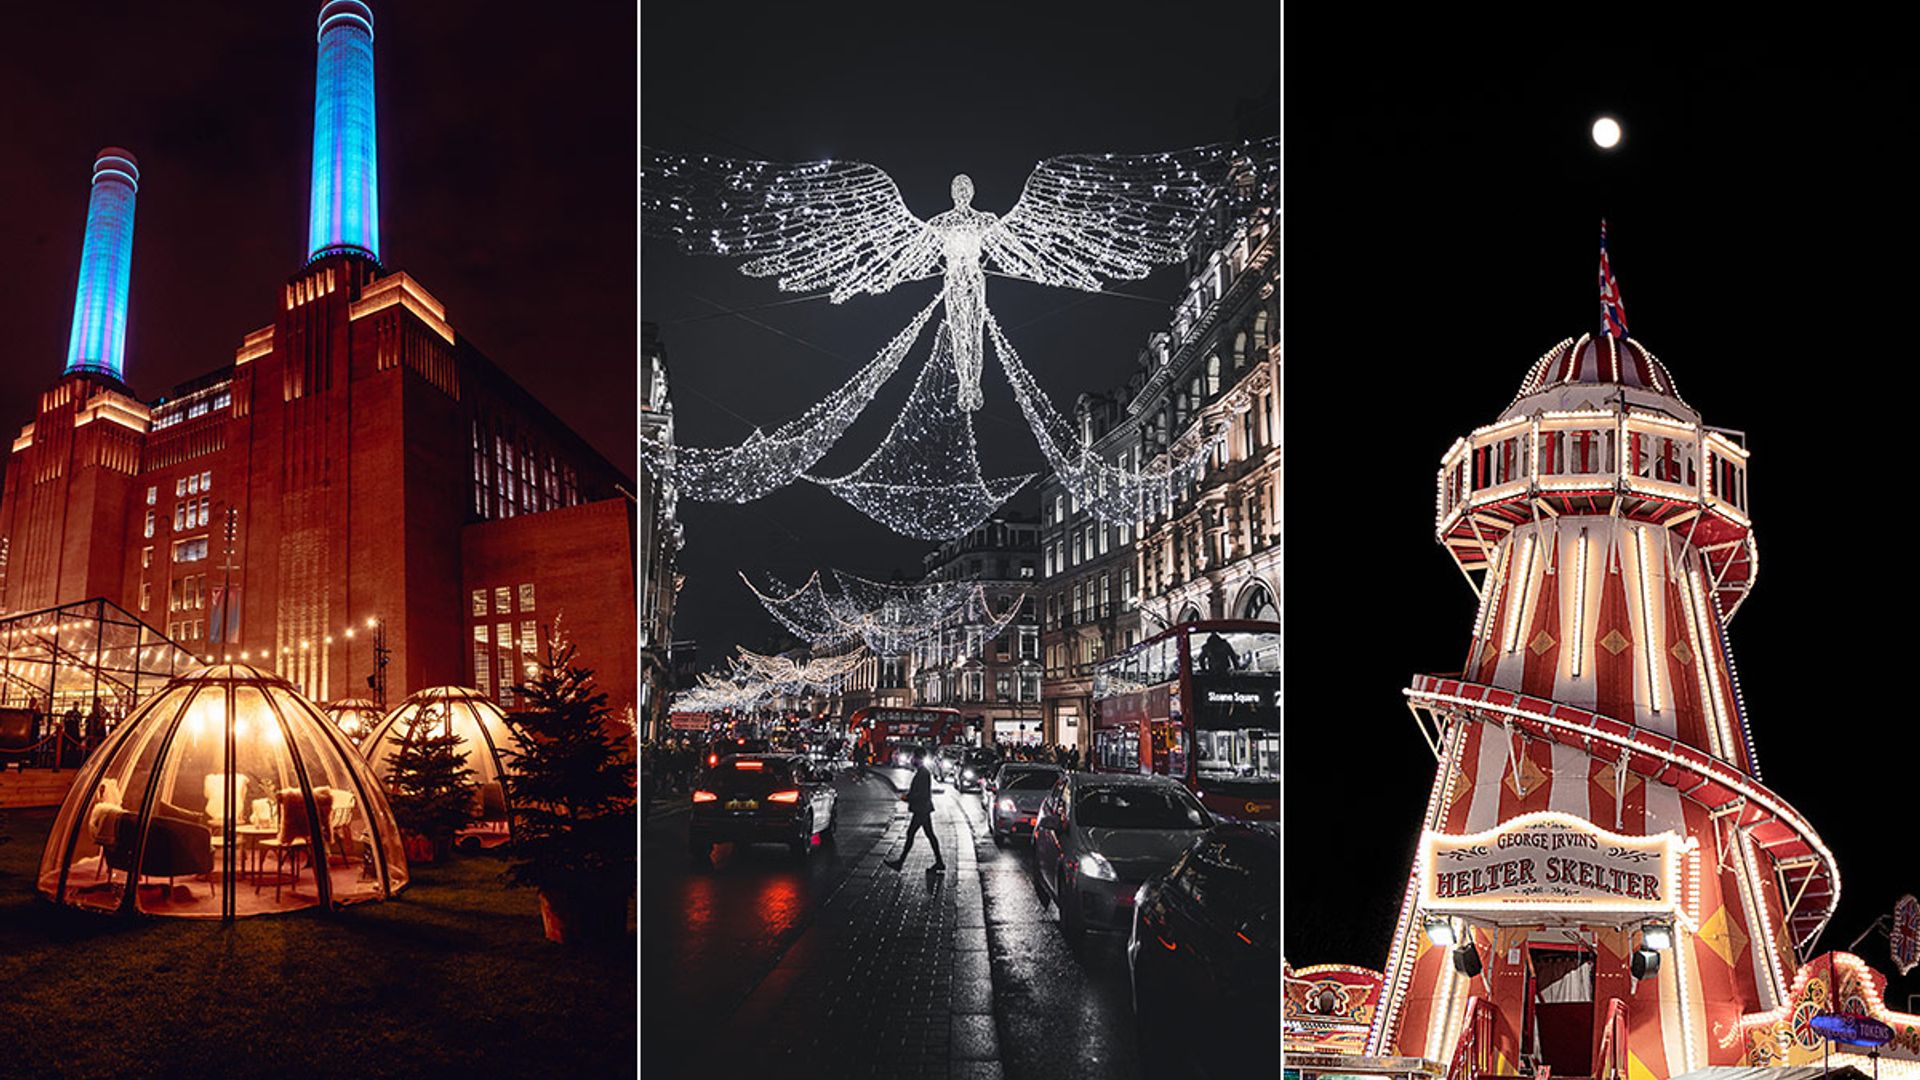 The Most Exclusive New Drinking Experiences To Have In London This December